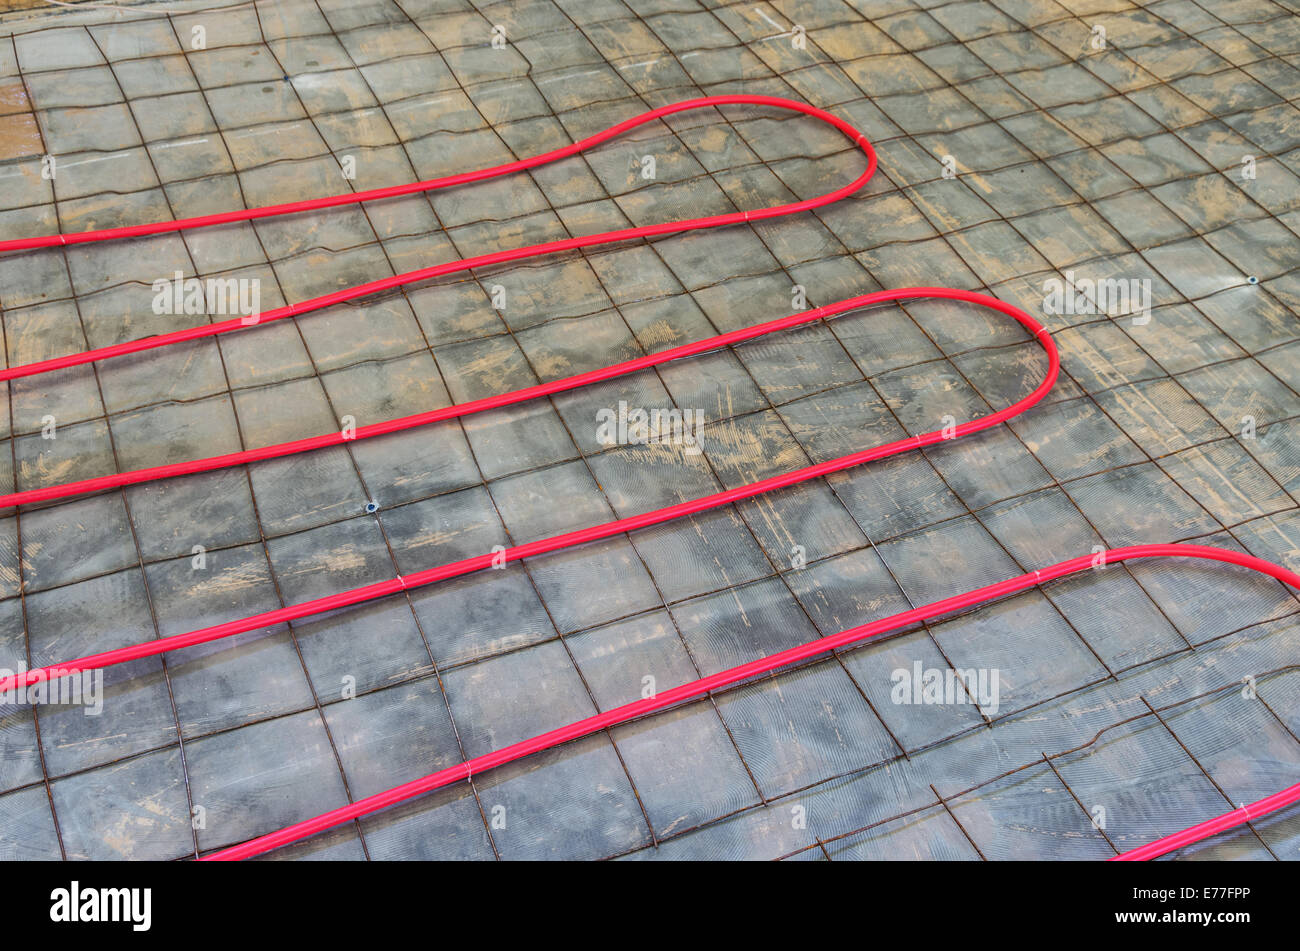 hydronic heat pex piping installation onto existing floor Stock Photo